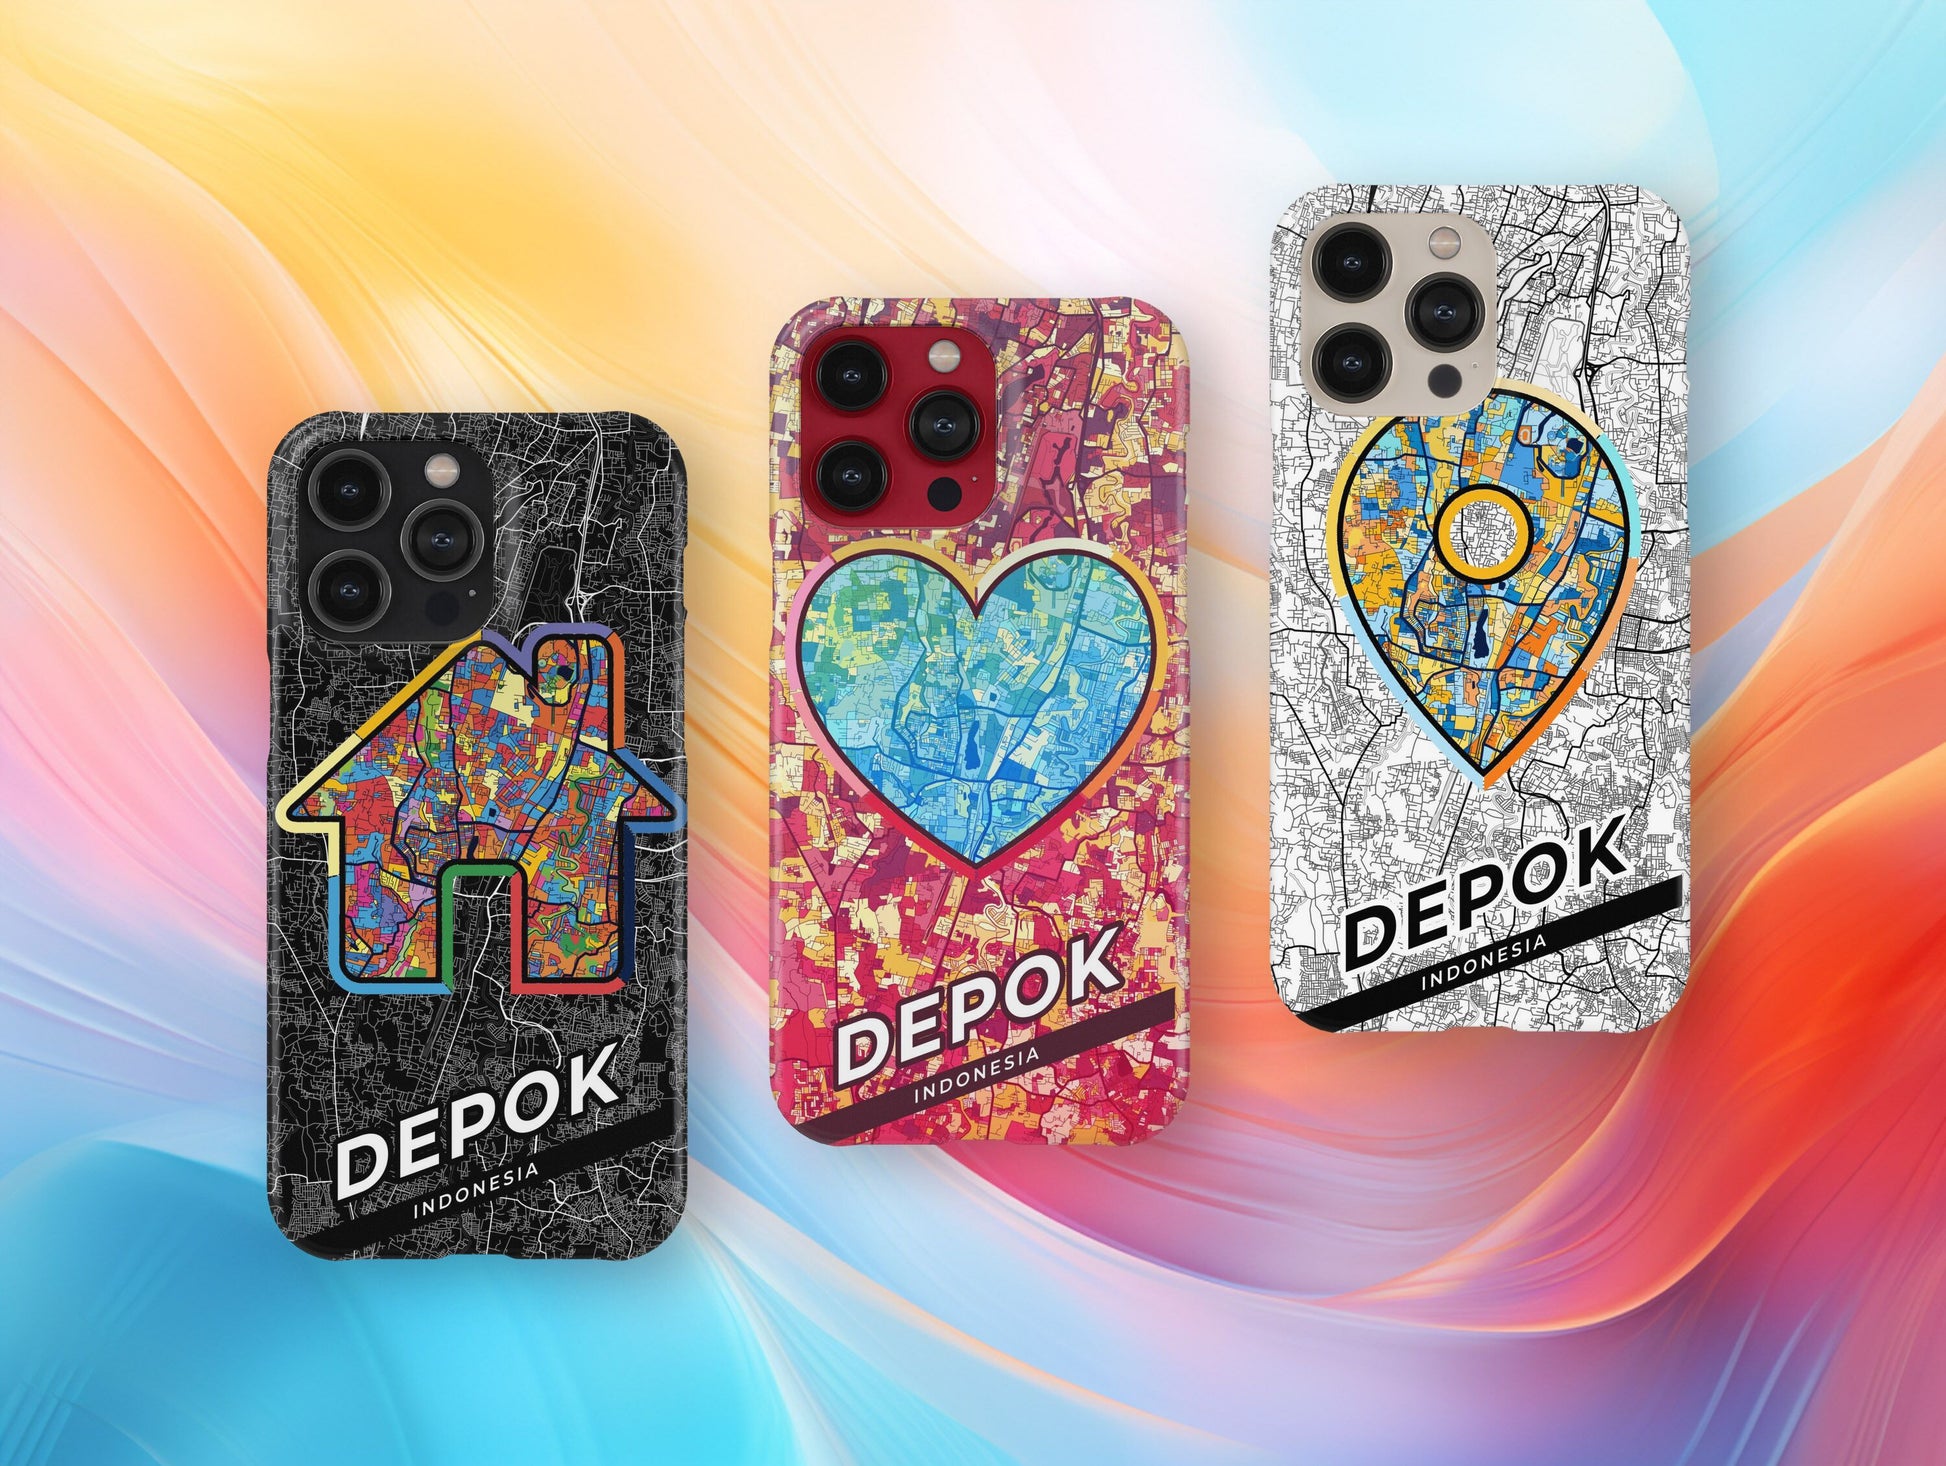 Depok Indonesia slim phone case with colorful icon. Birthday, wedding or housewarming gift. Couple match cases.